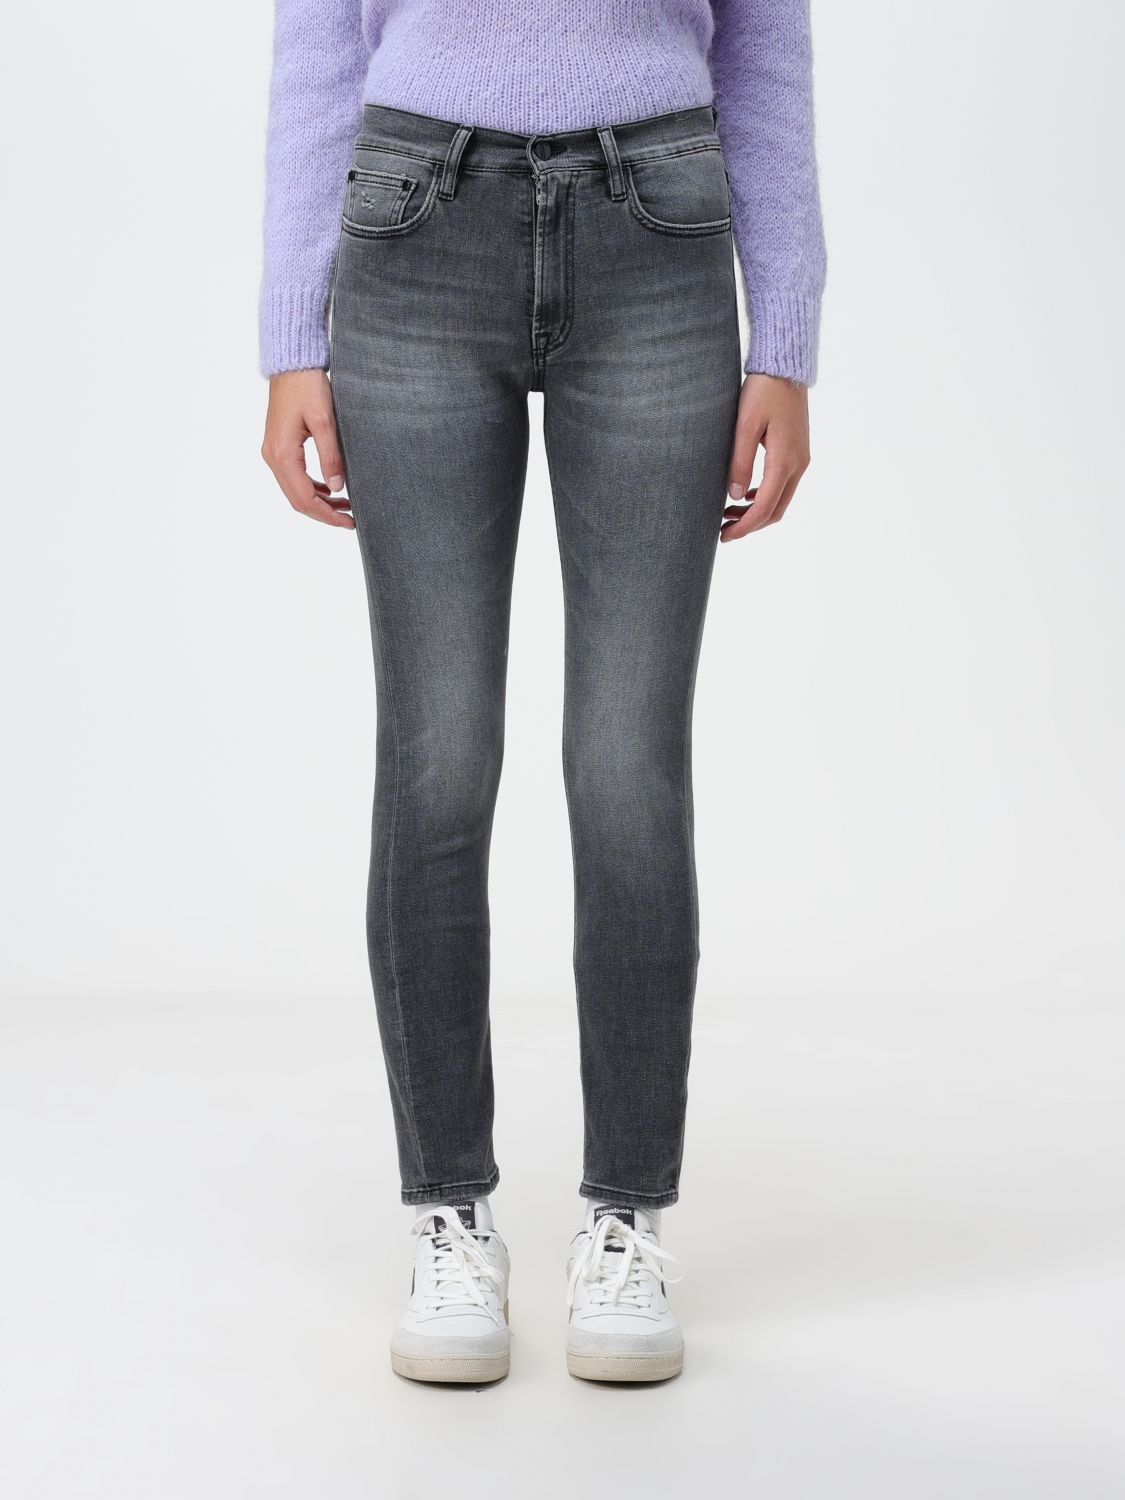 jeans cycle woman colour grey